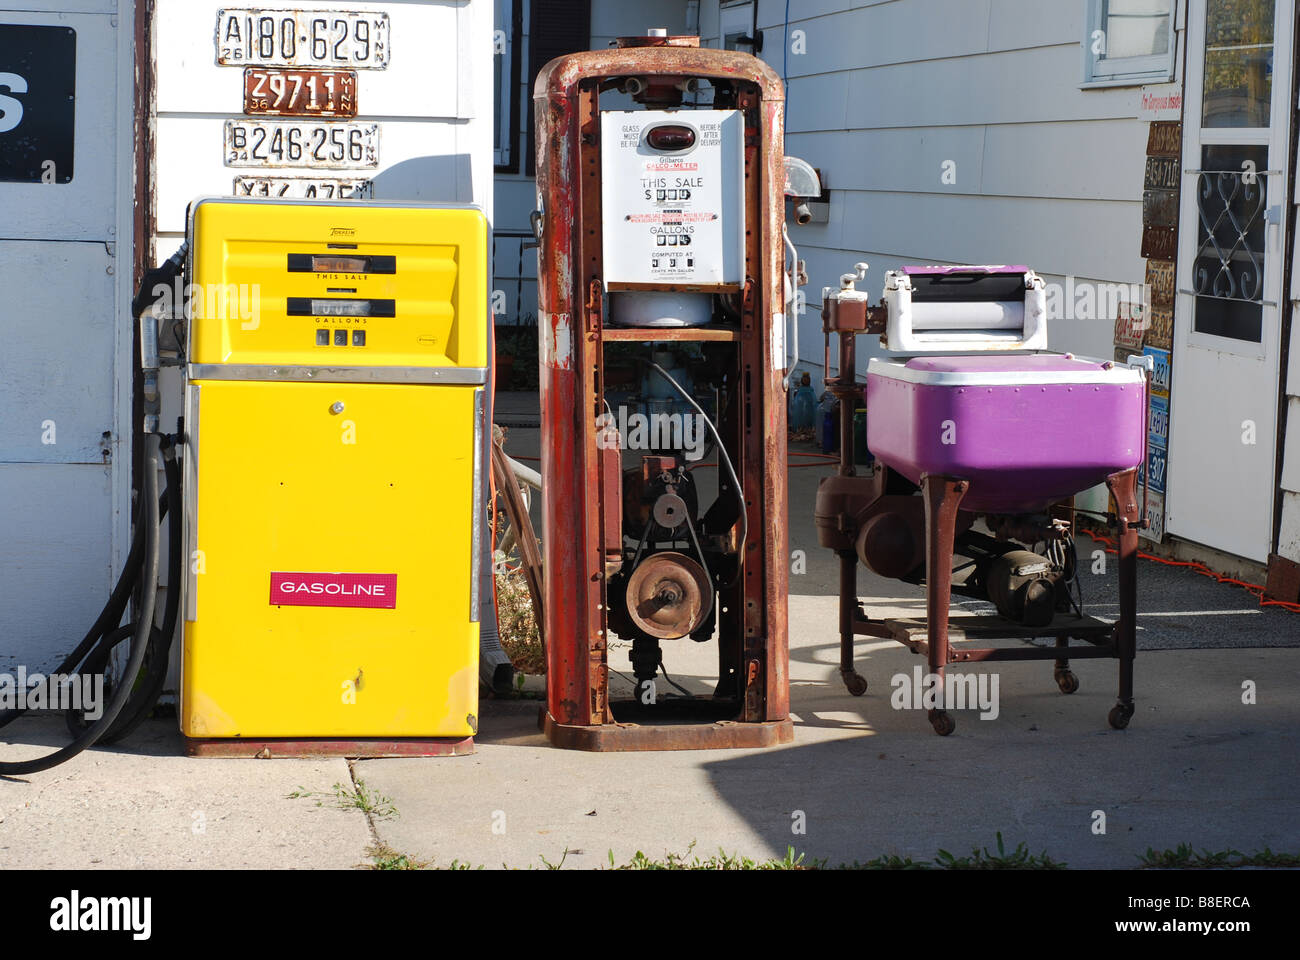 Antique gas pumps and a washer make an unusual still life Stock Photo